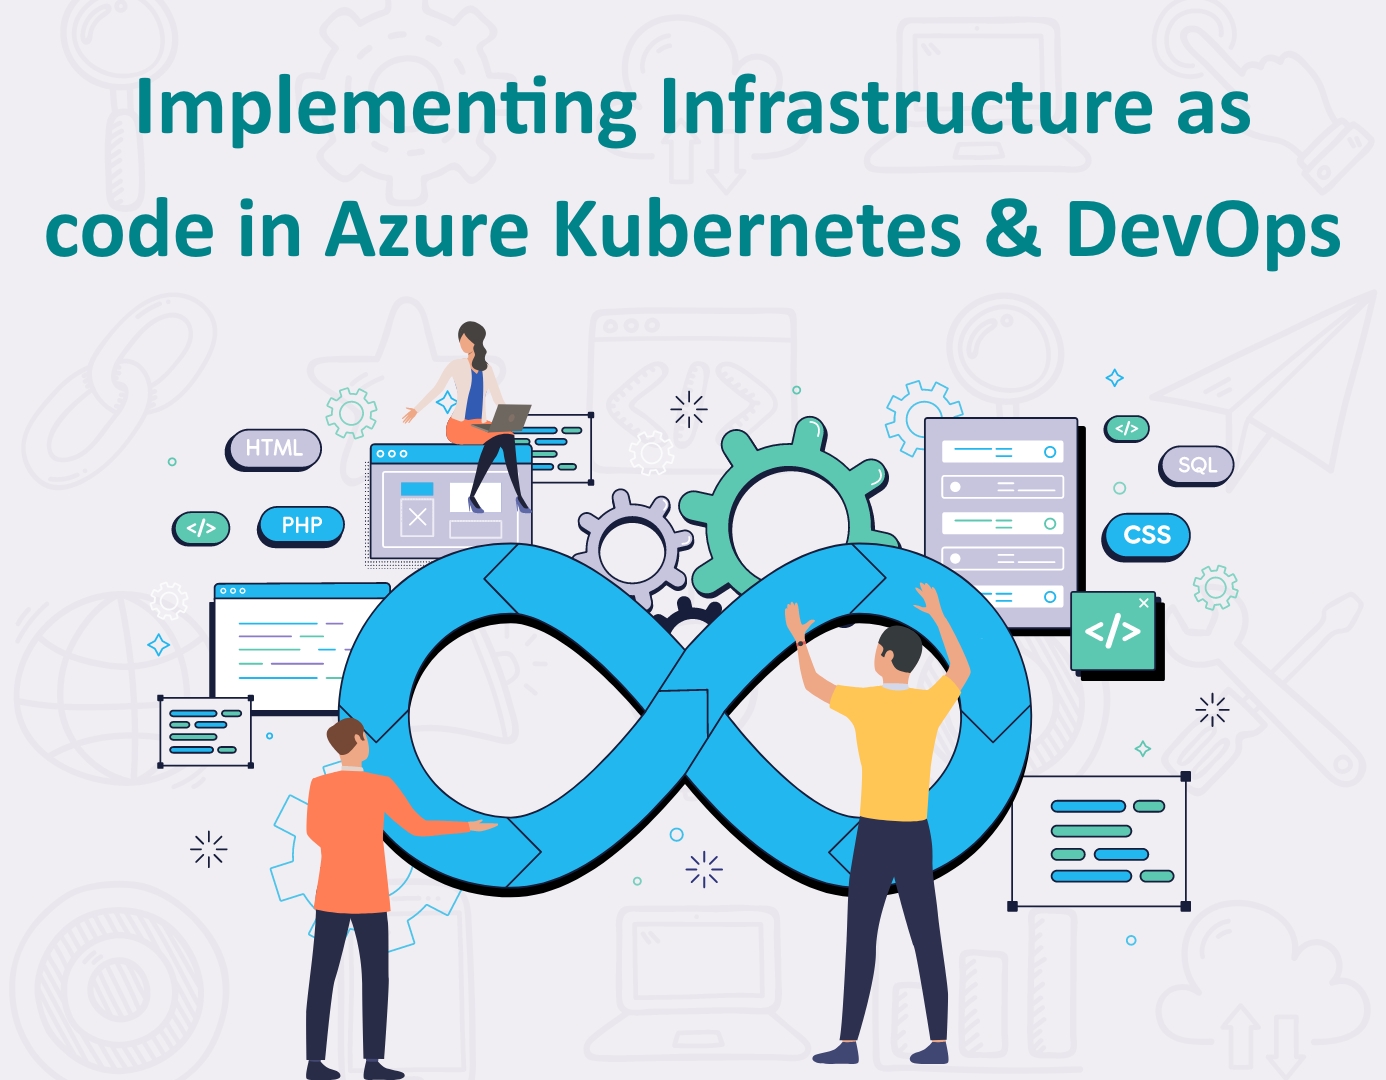 Azure Kubernetes & DevOps - Infrastructure as Code implementation, showcasing streamlined deployment and automation for efficient operations